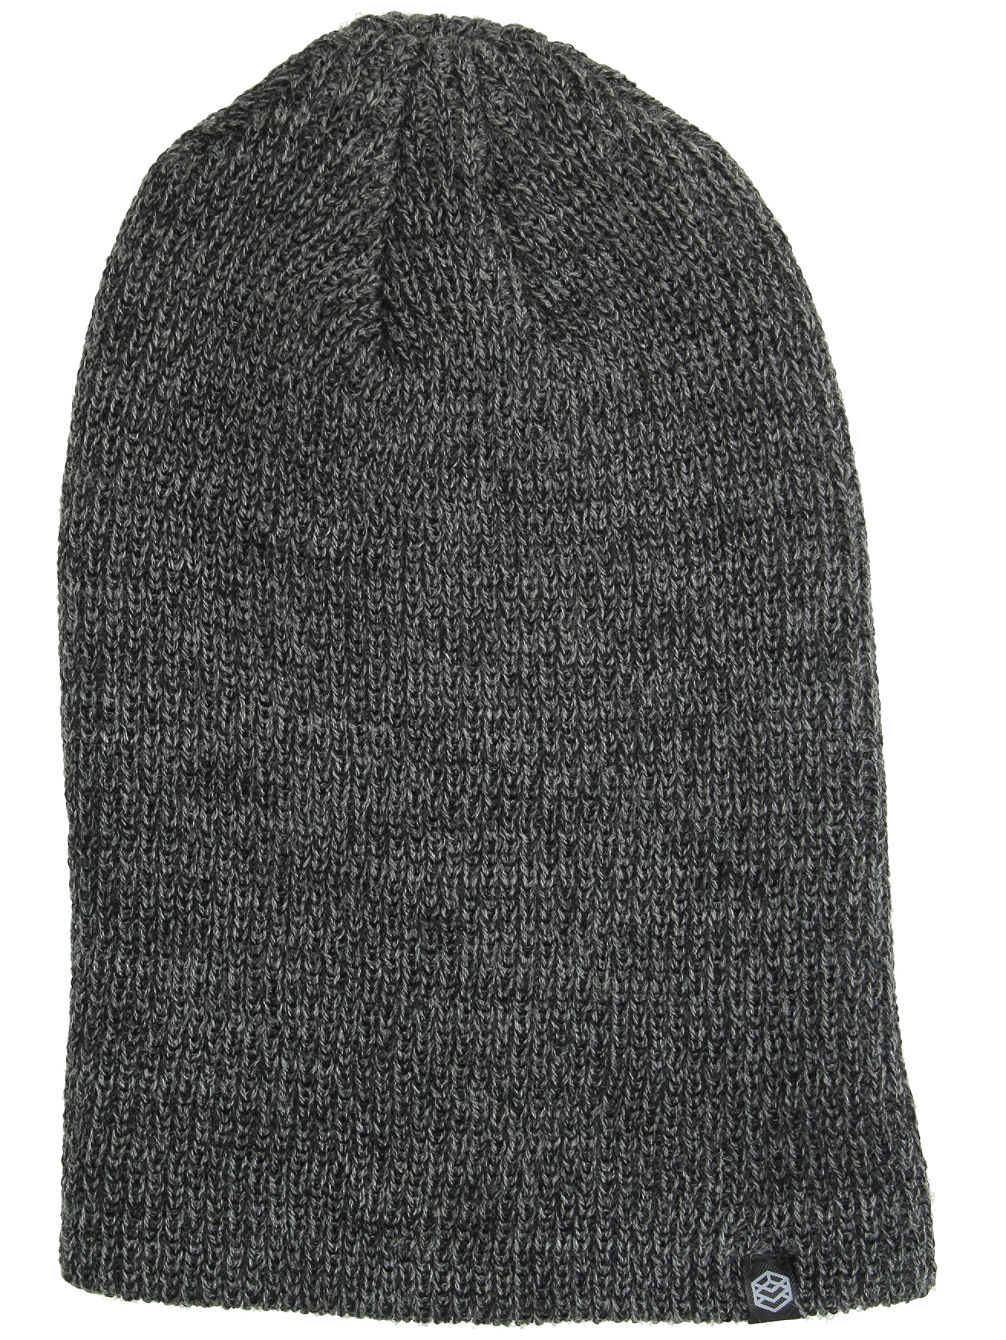 Toque Knit Slouch